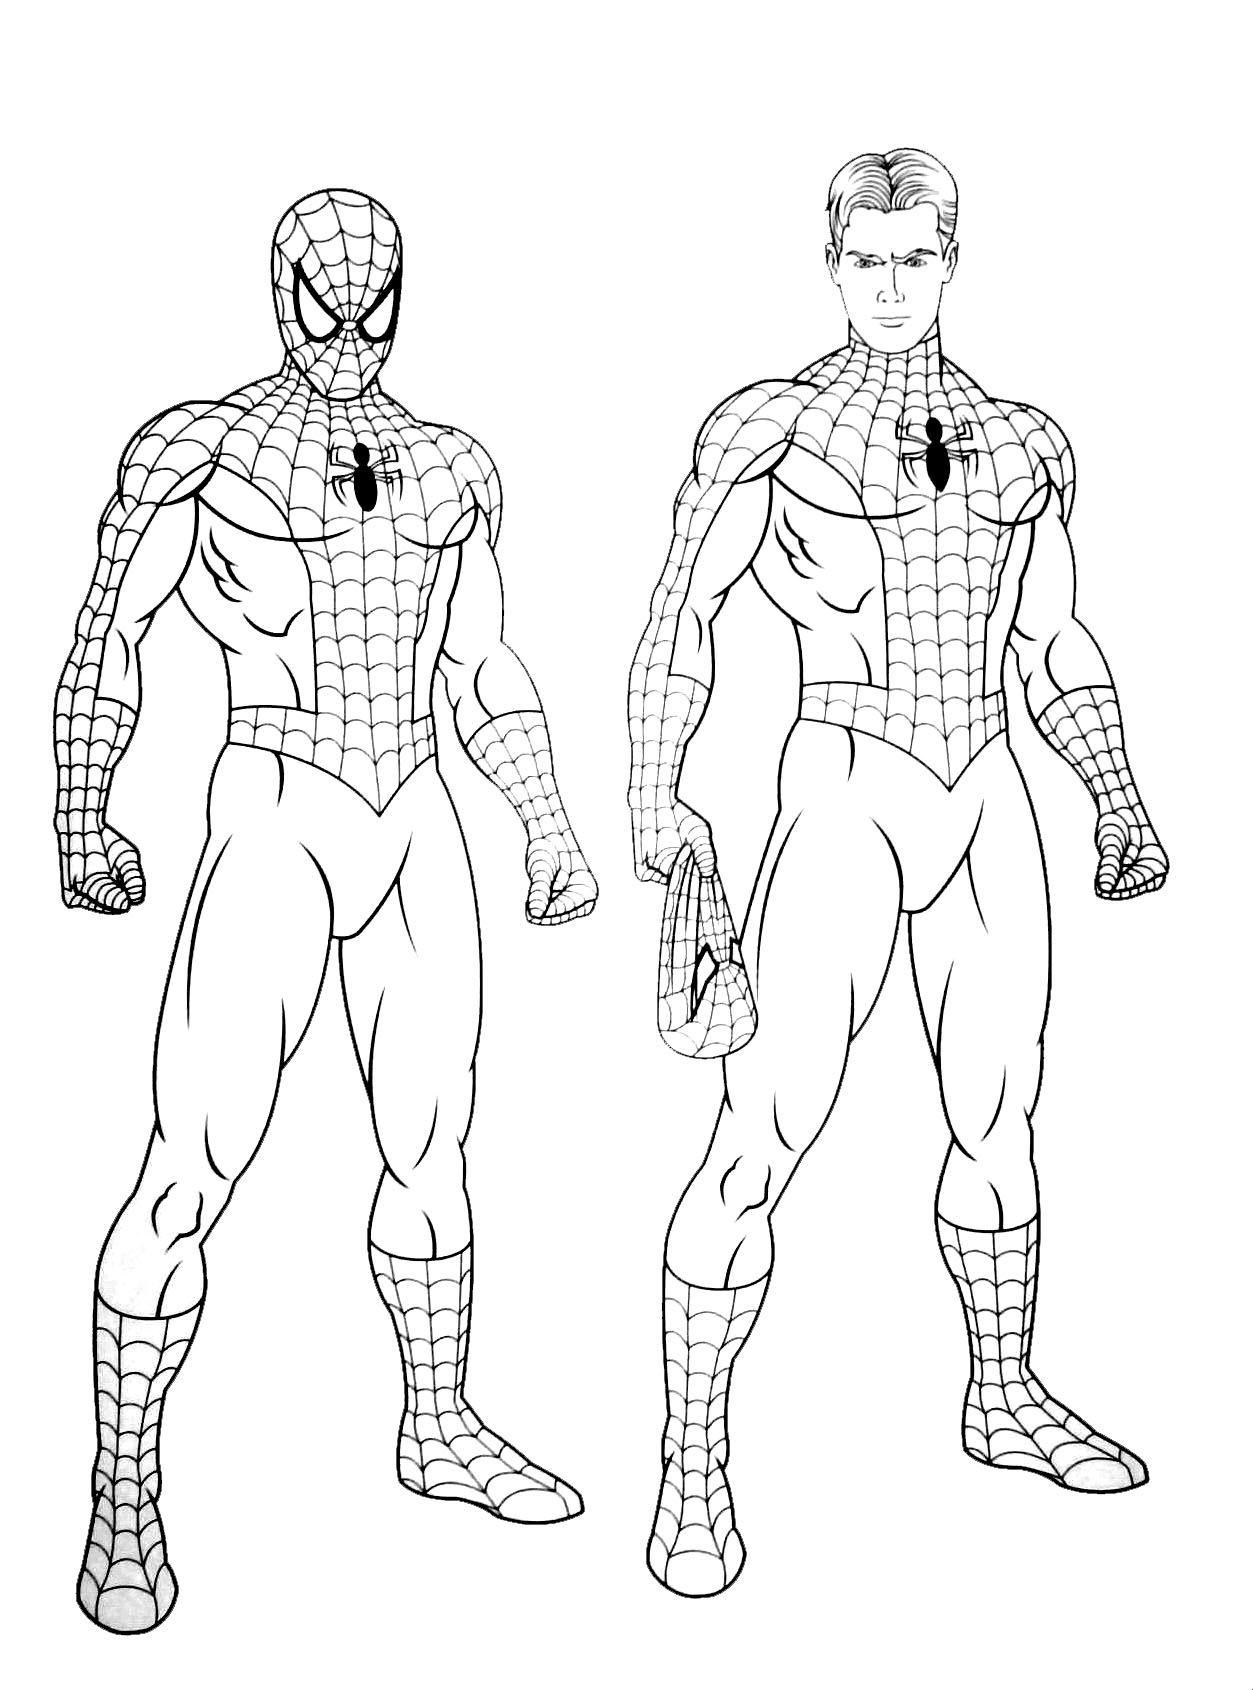 To Coloring for kids spiderman